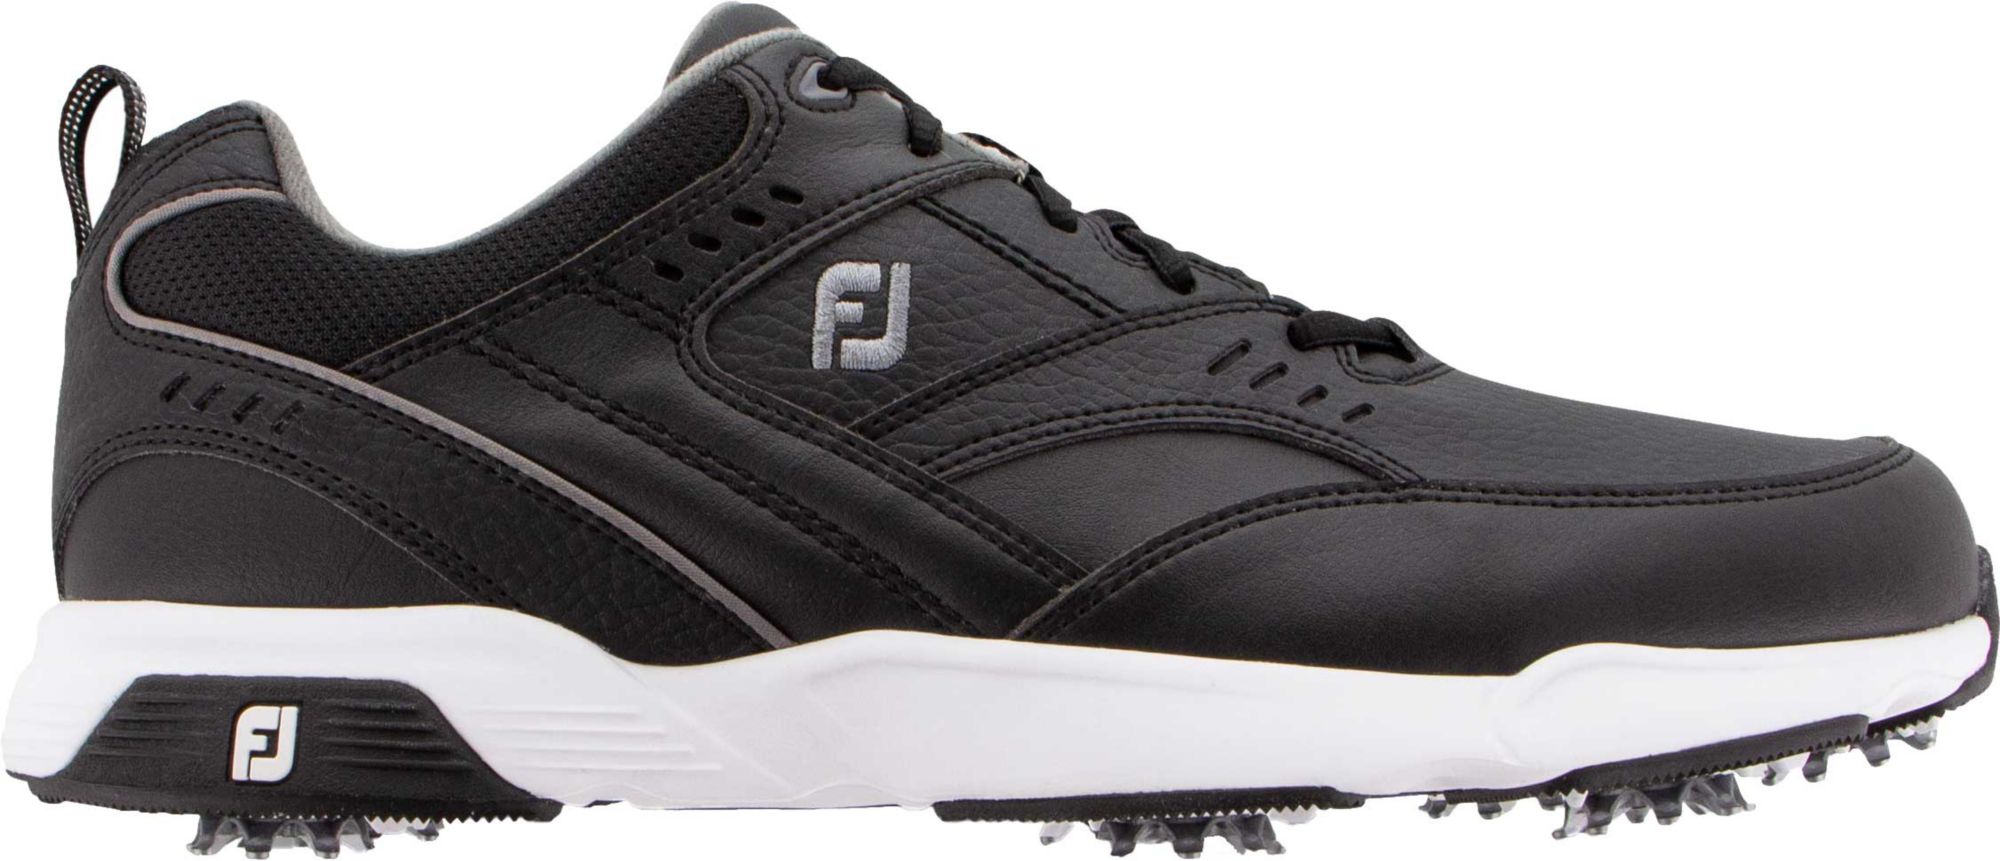 FootJoy Men's Specialty Golf Shoes - image 1 of 8